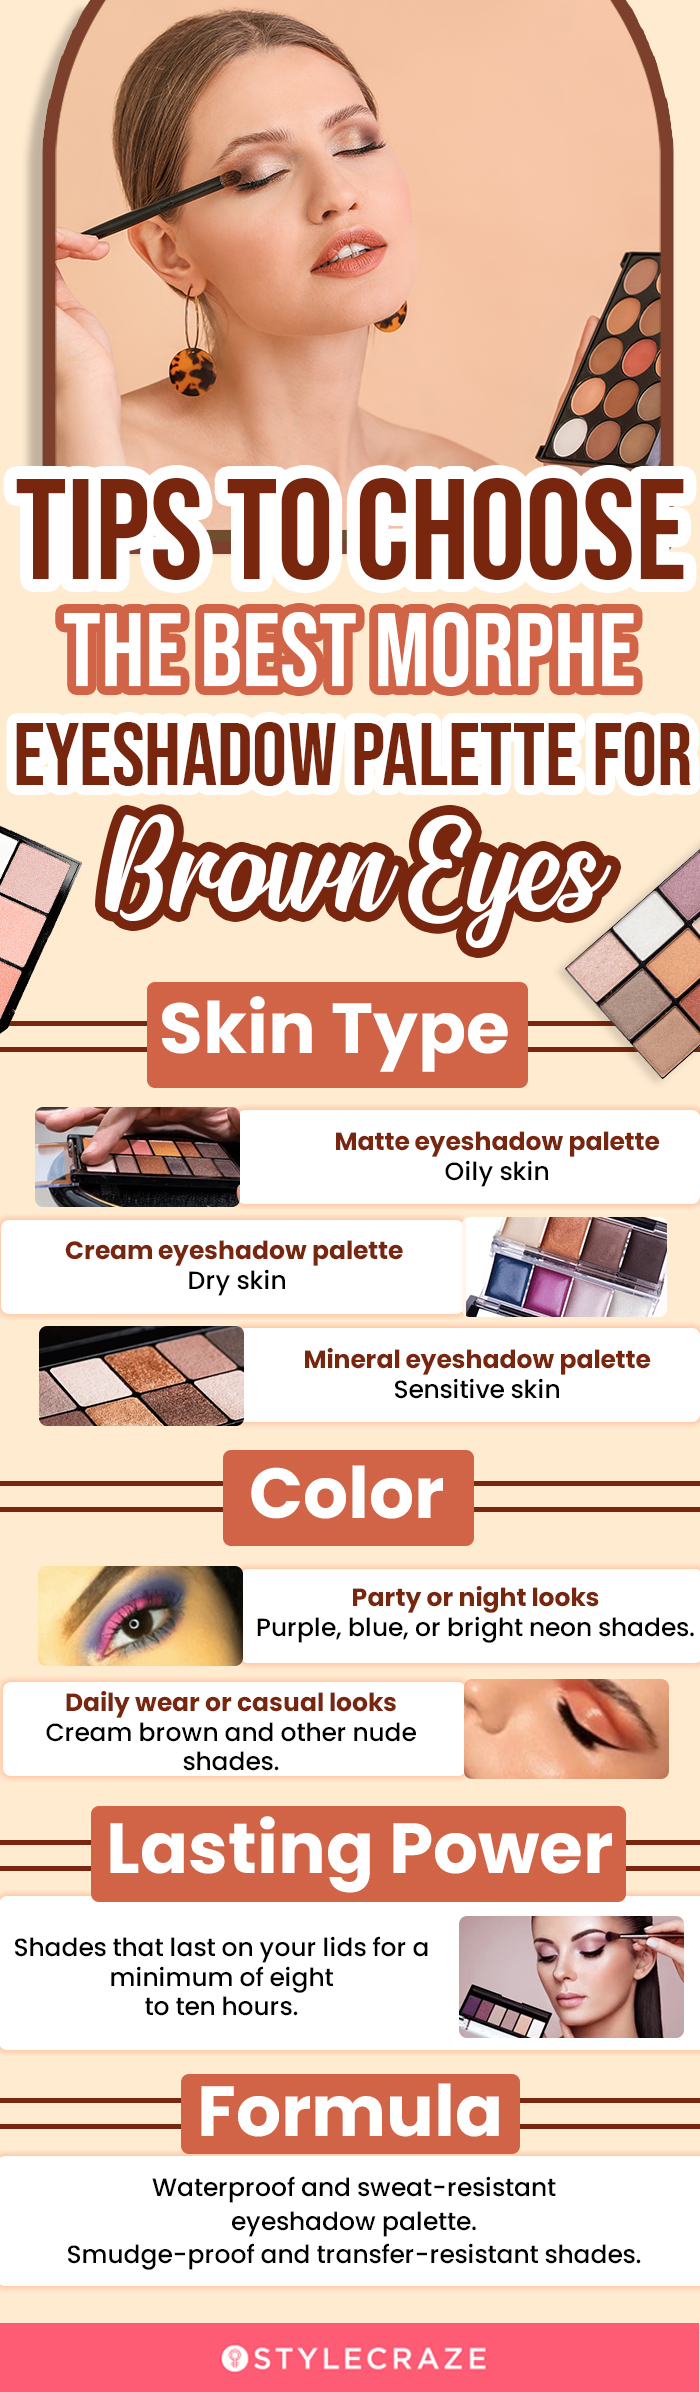 Best Morphe Eyeshadow Palette For Brown Eyes (infographic)